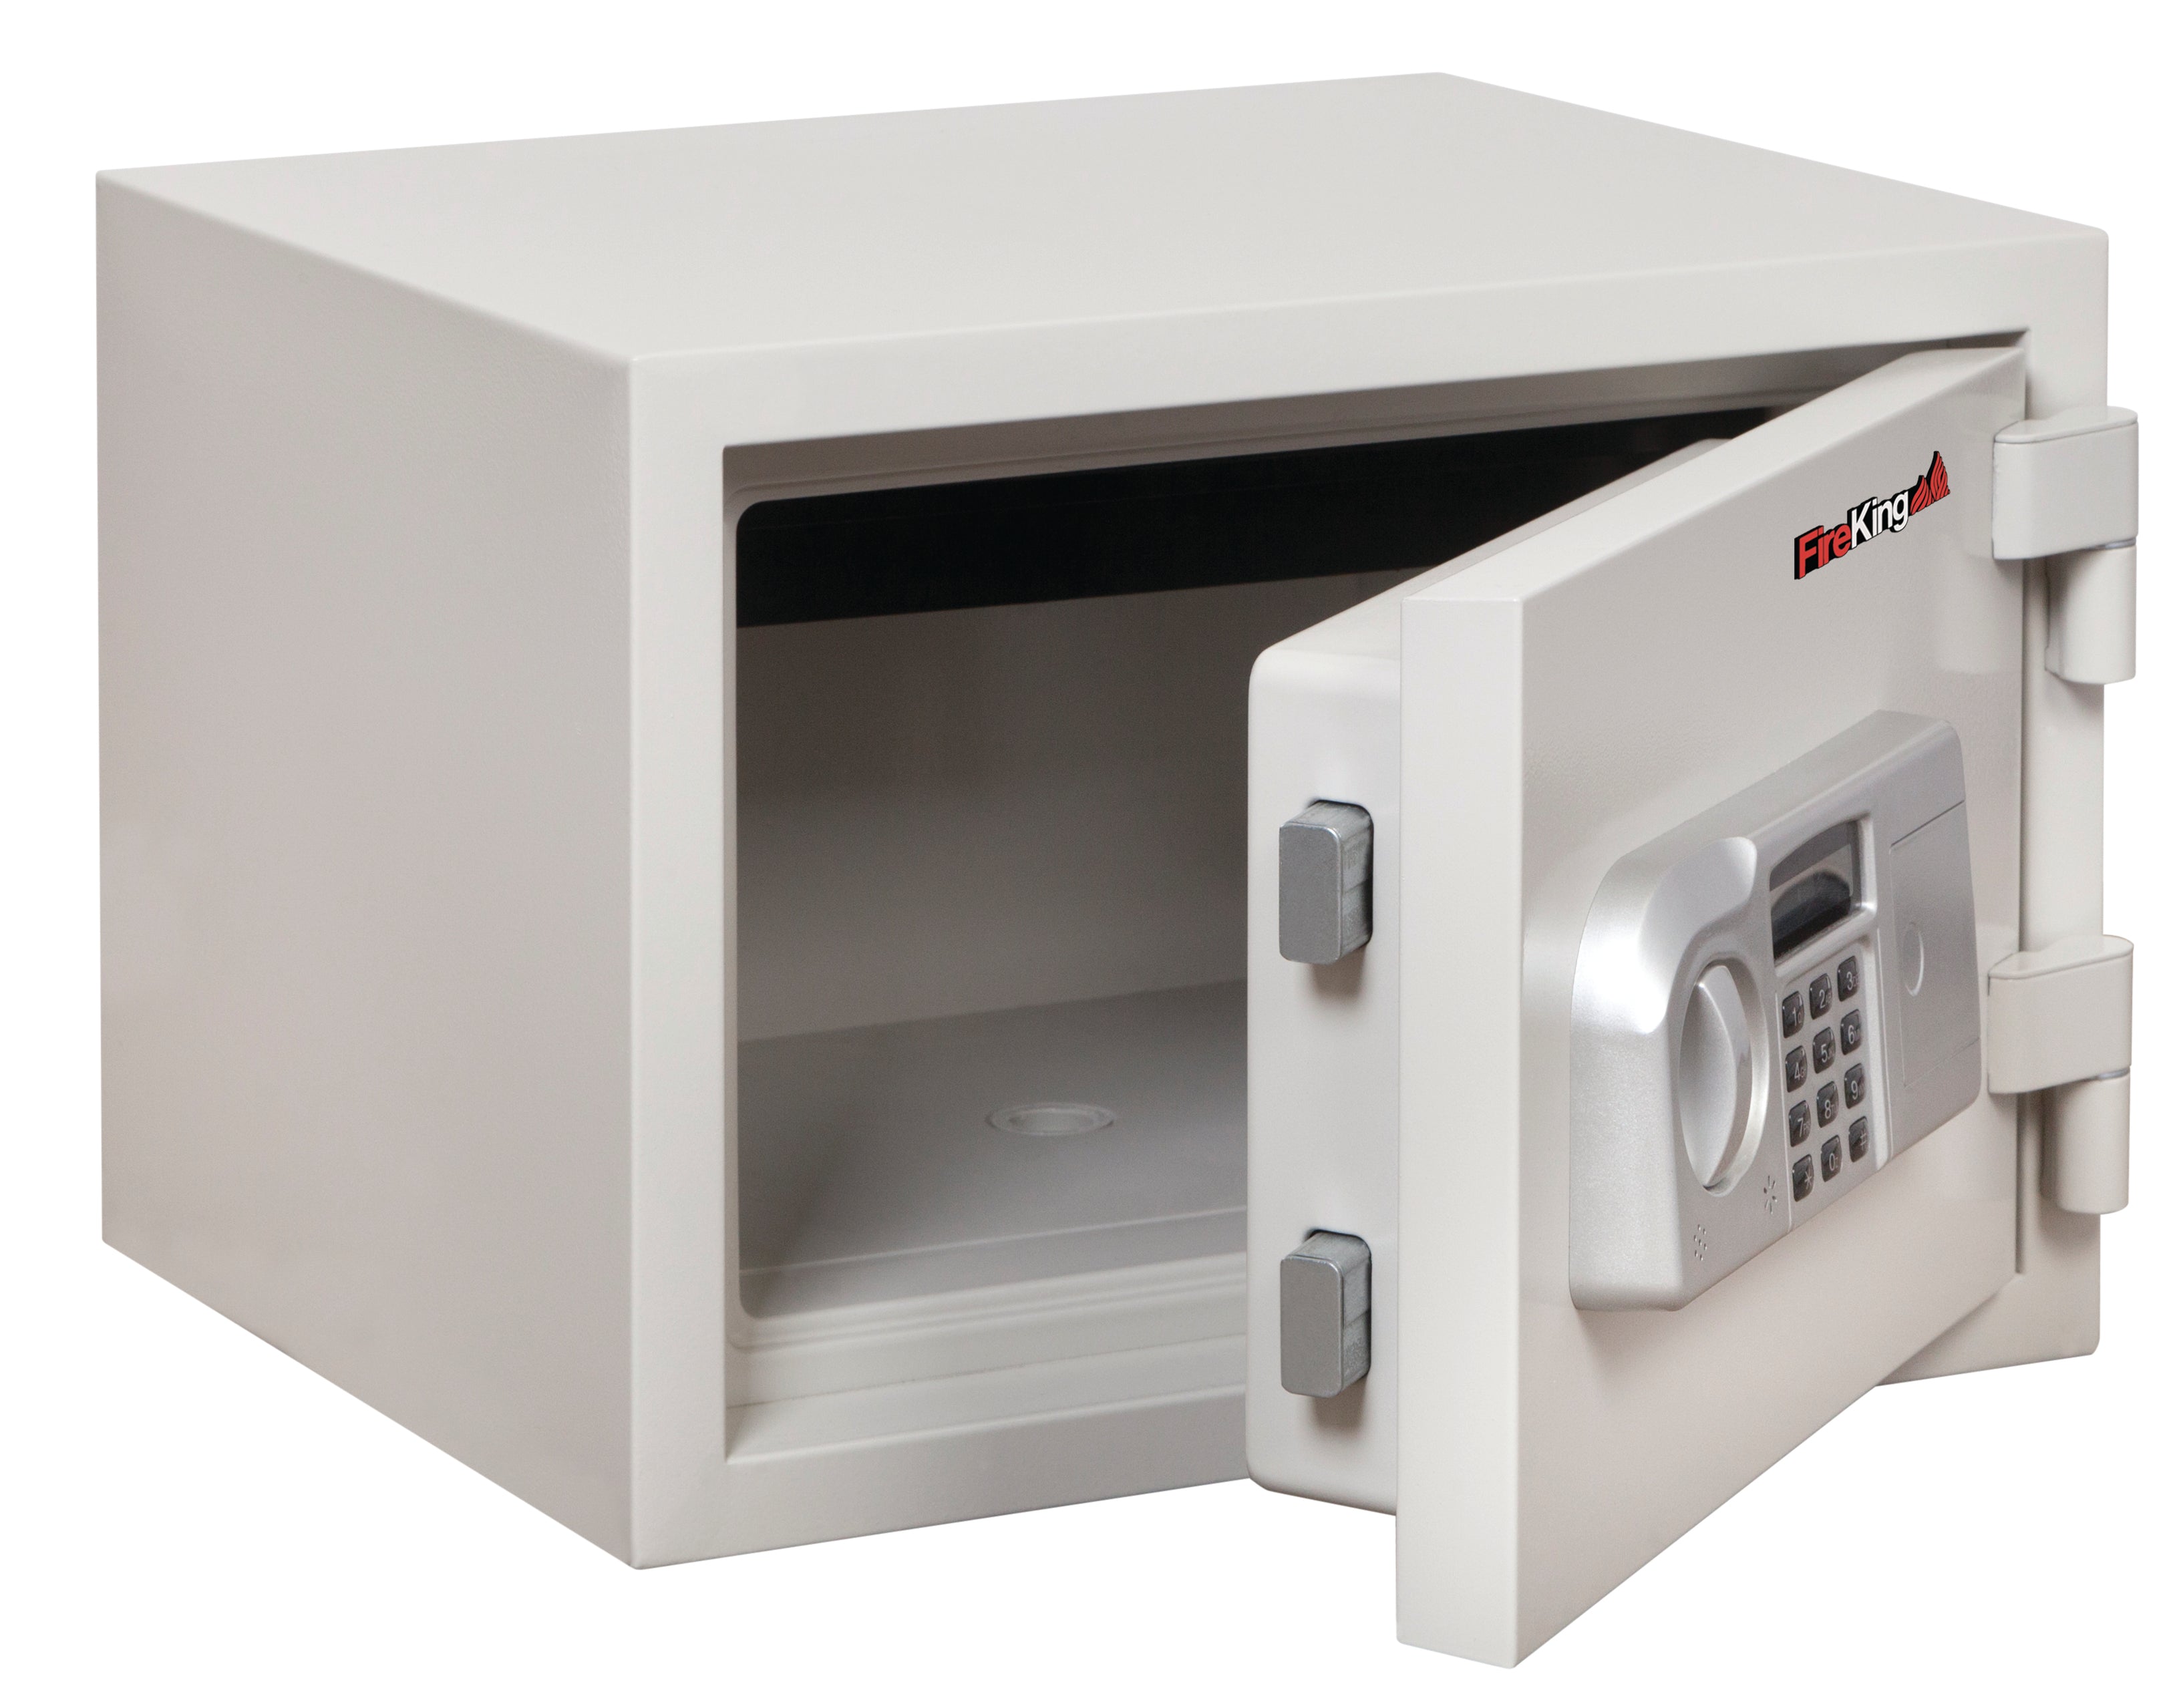 1-Hour Fire-Resistant safe with one tray